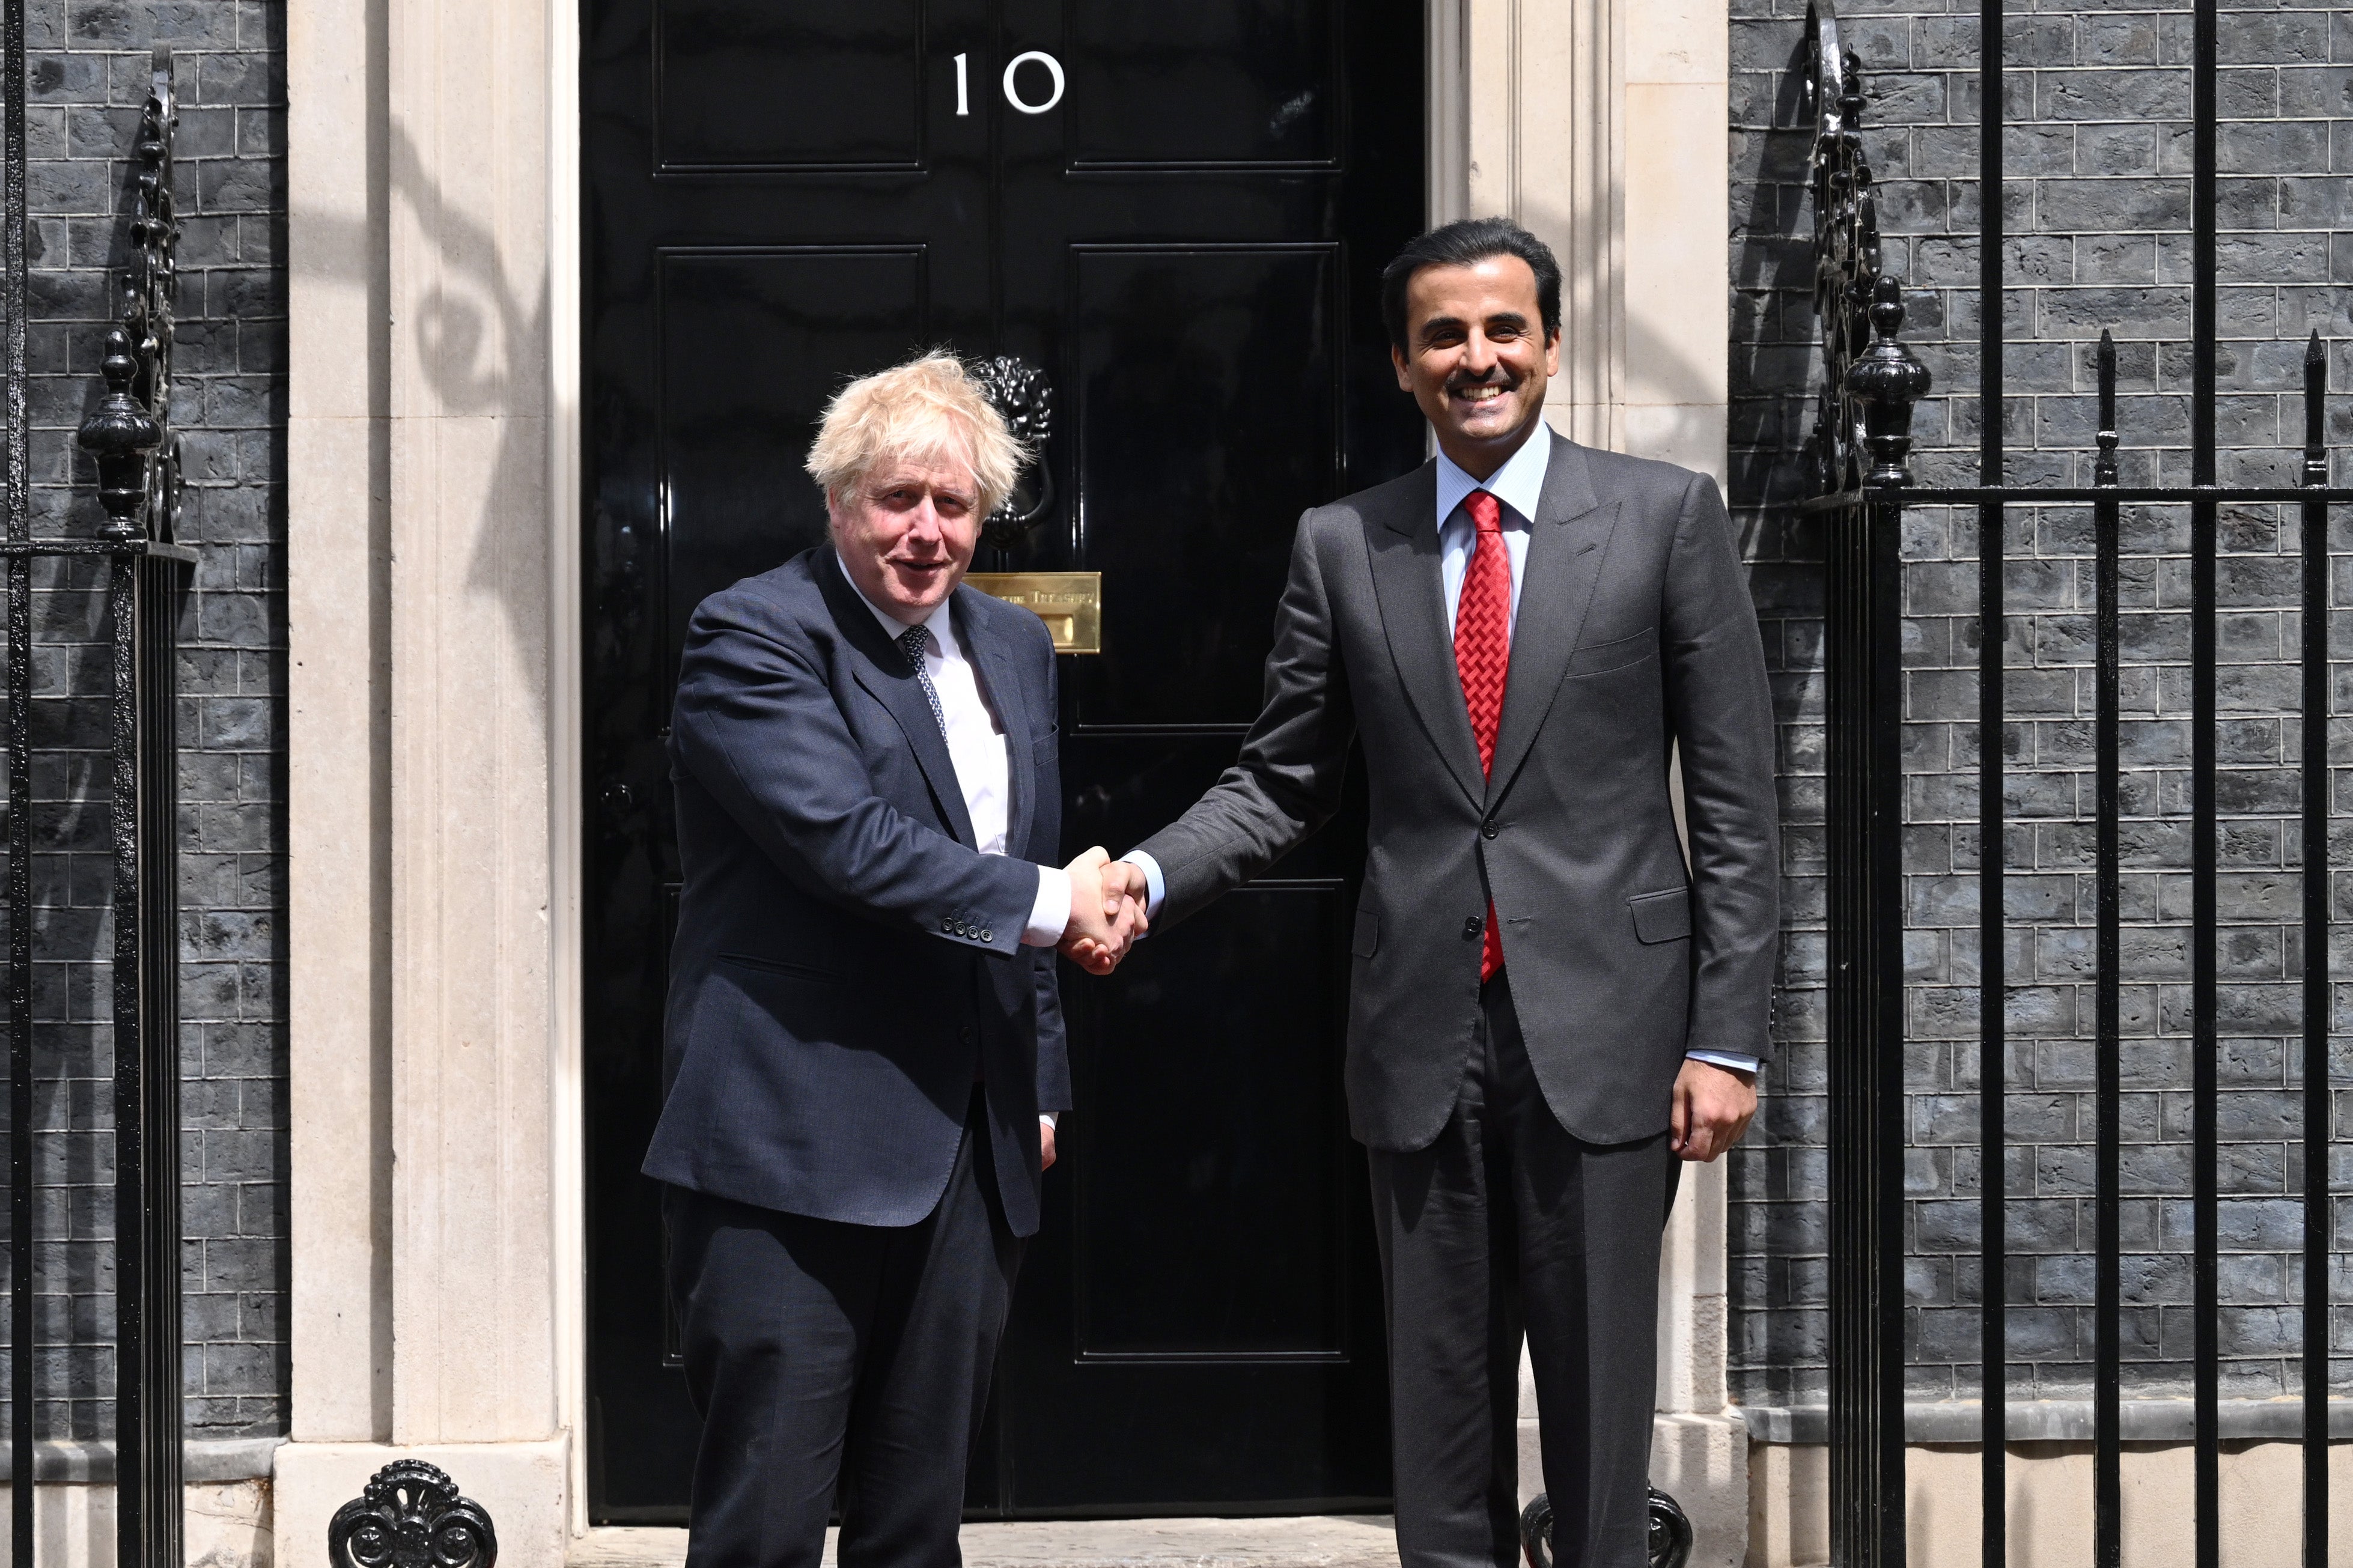 In May Boris Johnson met Qatar’s leader, Sheikh Tamim bin Hamad al-Thani, and celebrated the ‘important trade’ between the two countries